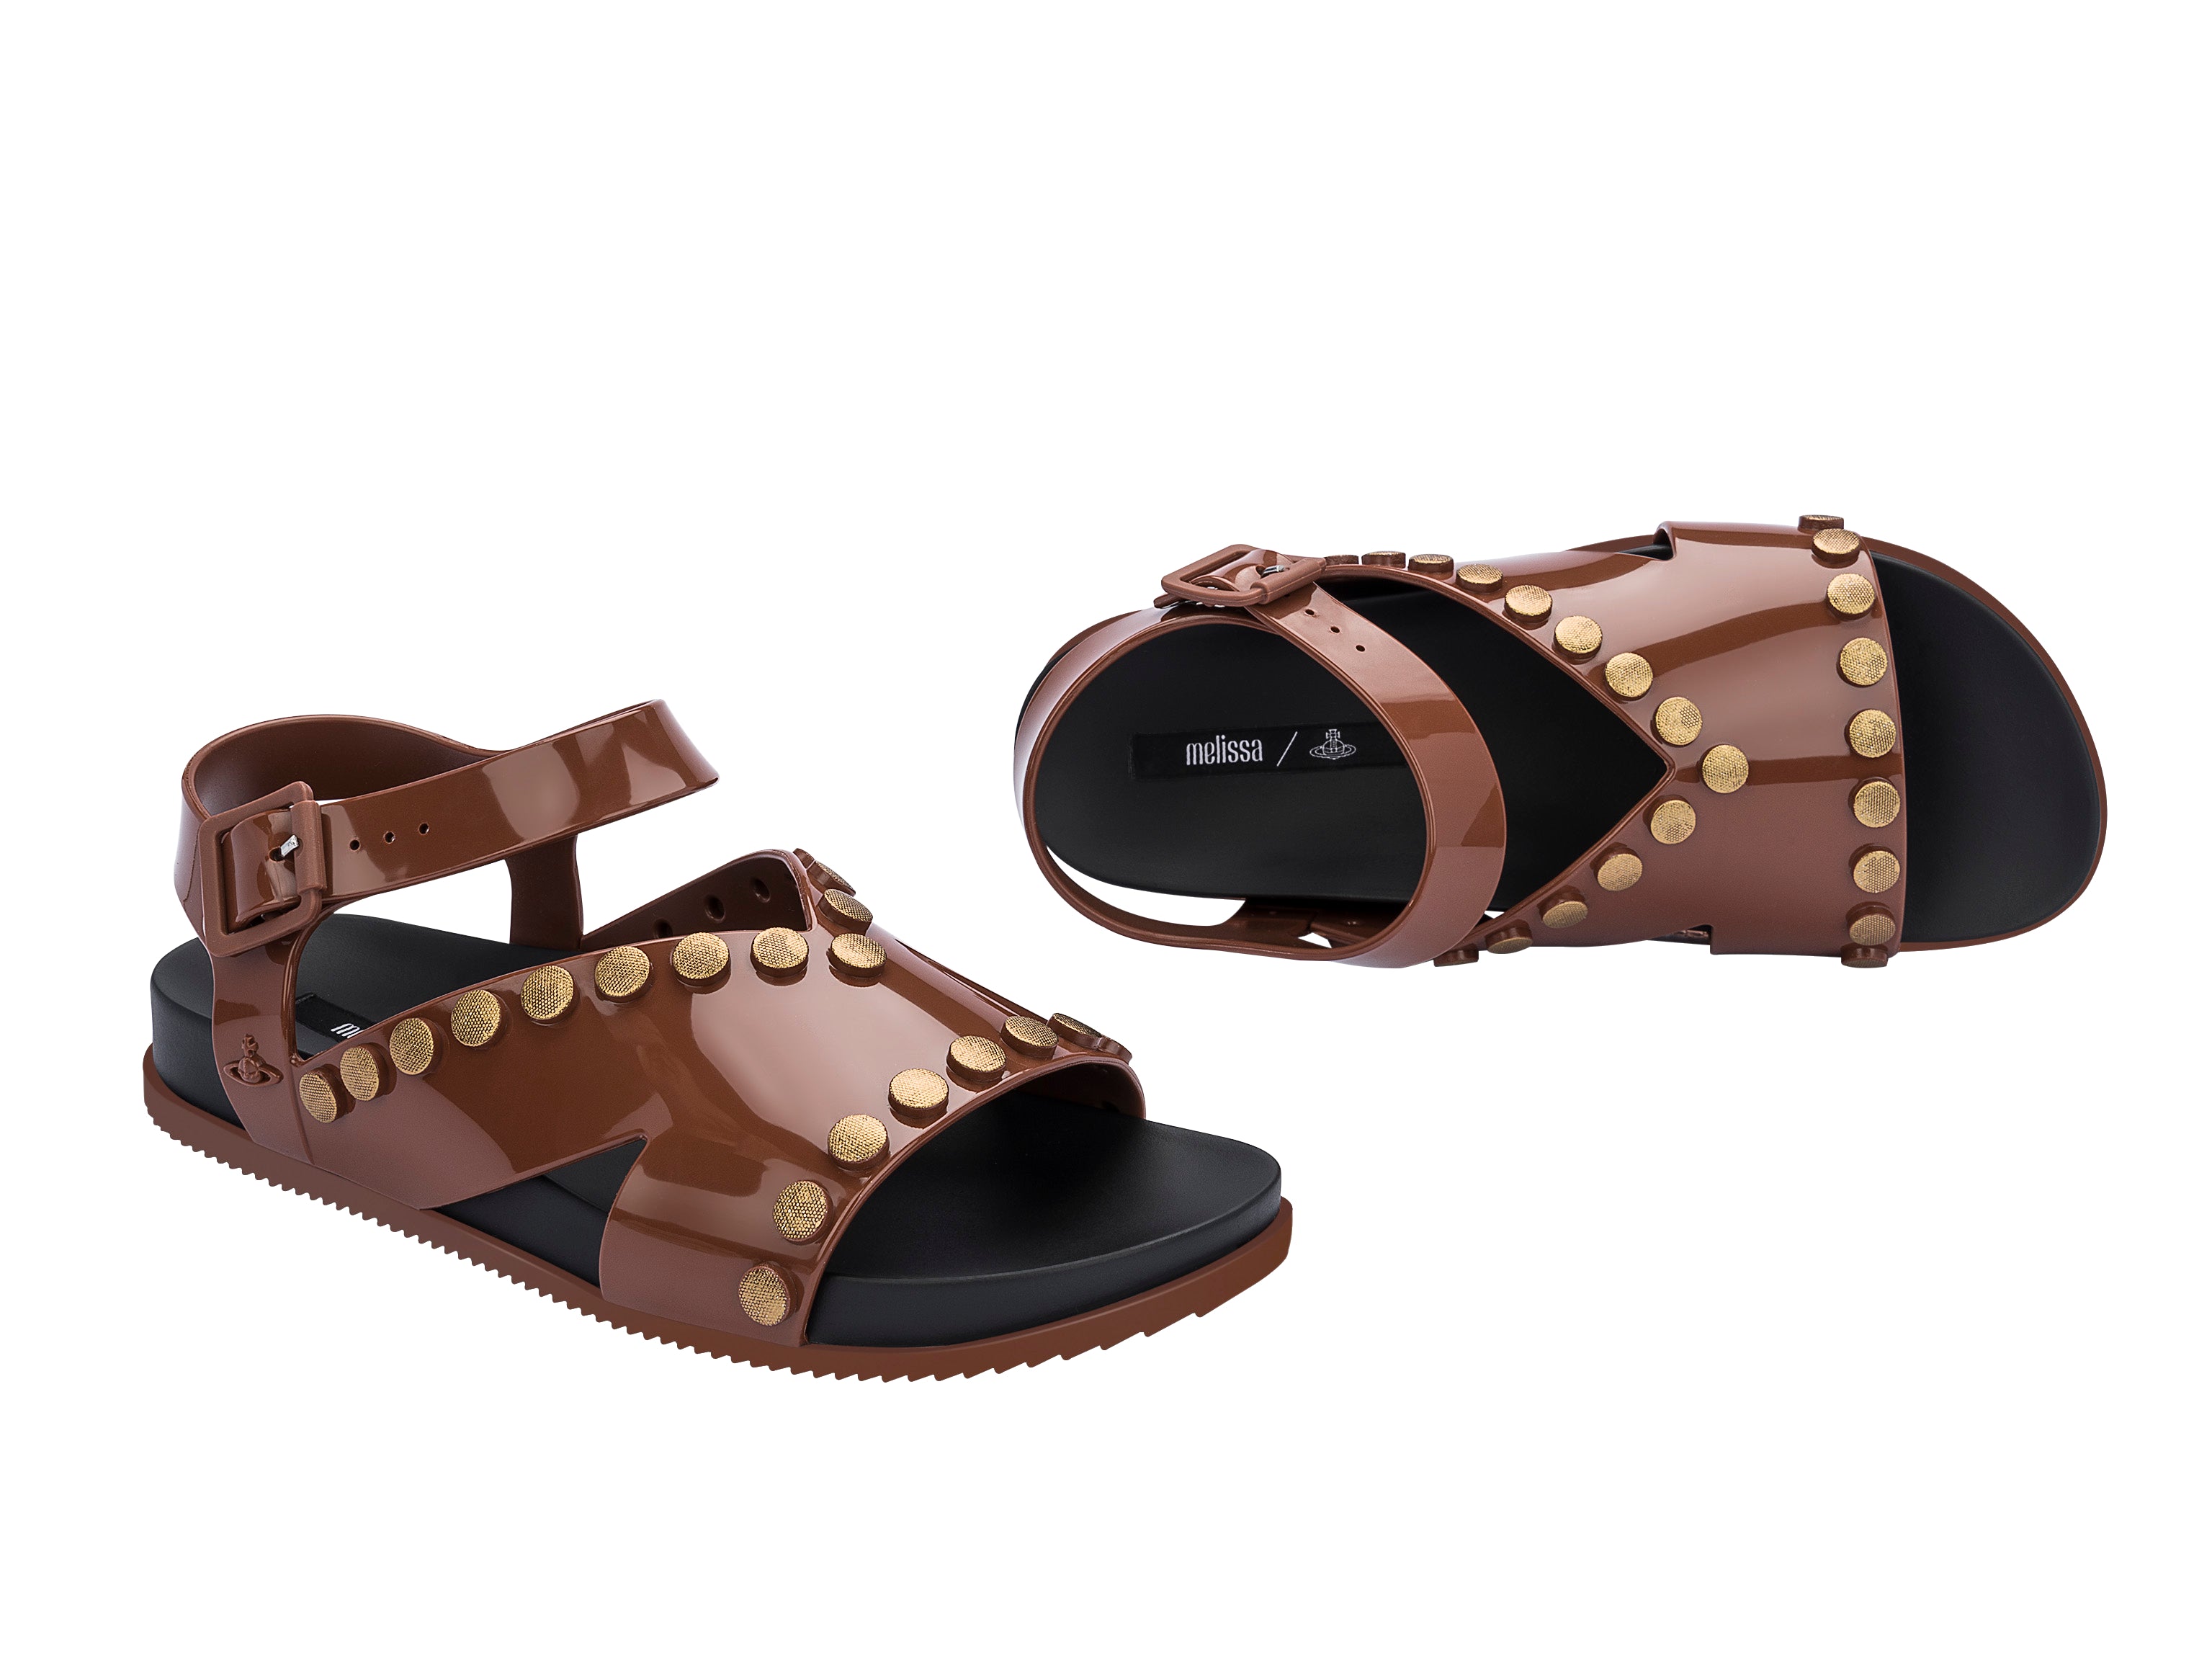 Vivienne Westwood Anglomania X Melissa Ciao Sandal - Brown